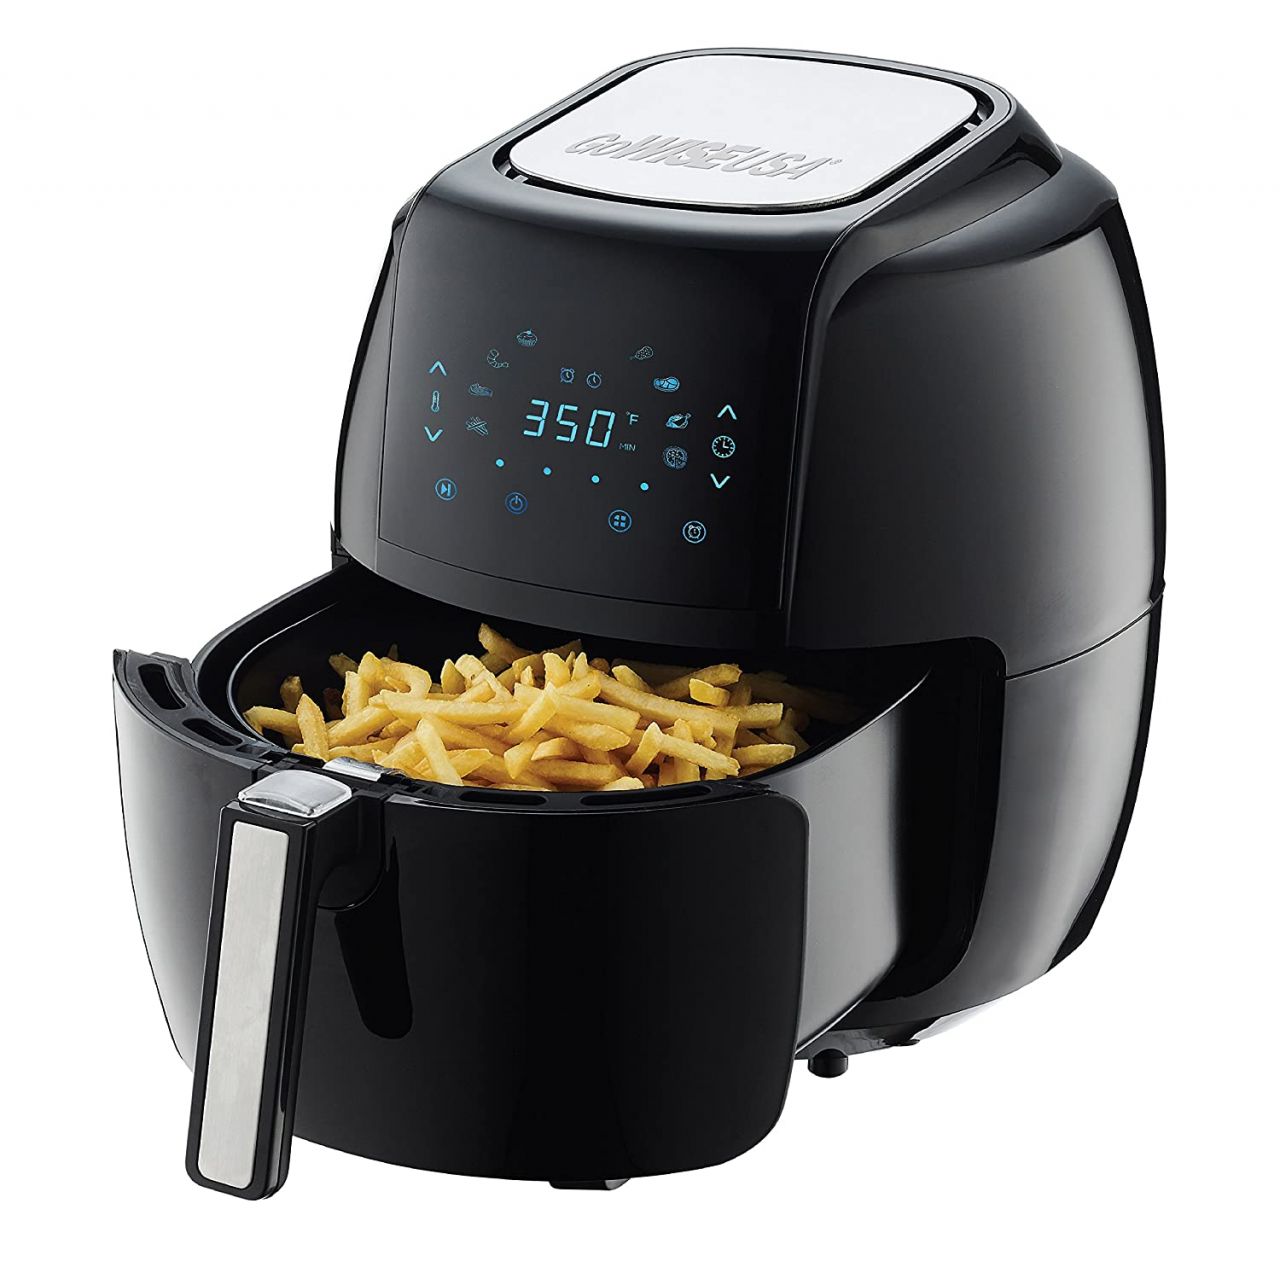 GoWISE USA 5.8 Qt 1700W XL 8-In-1 Air Fryer